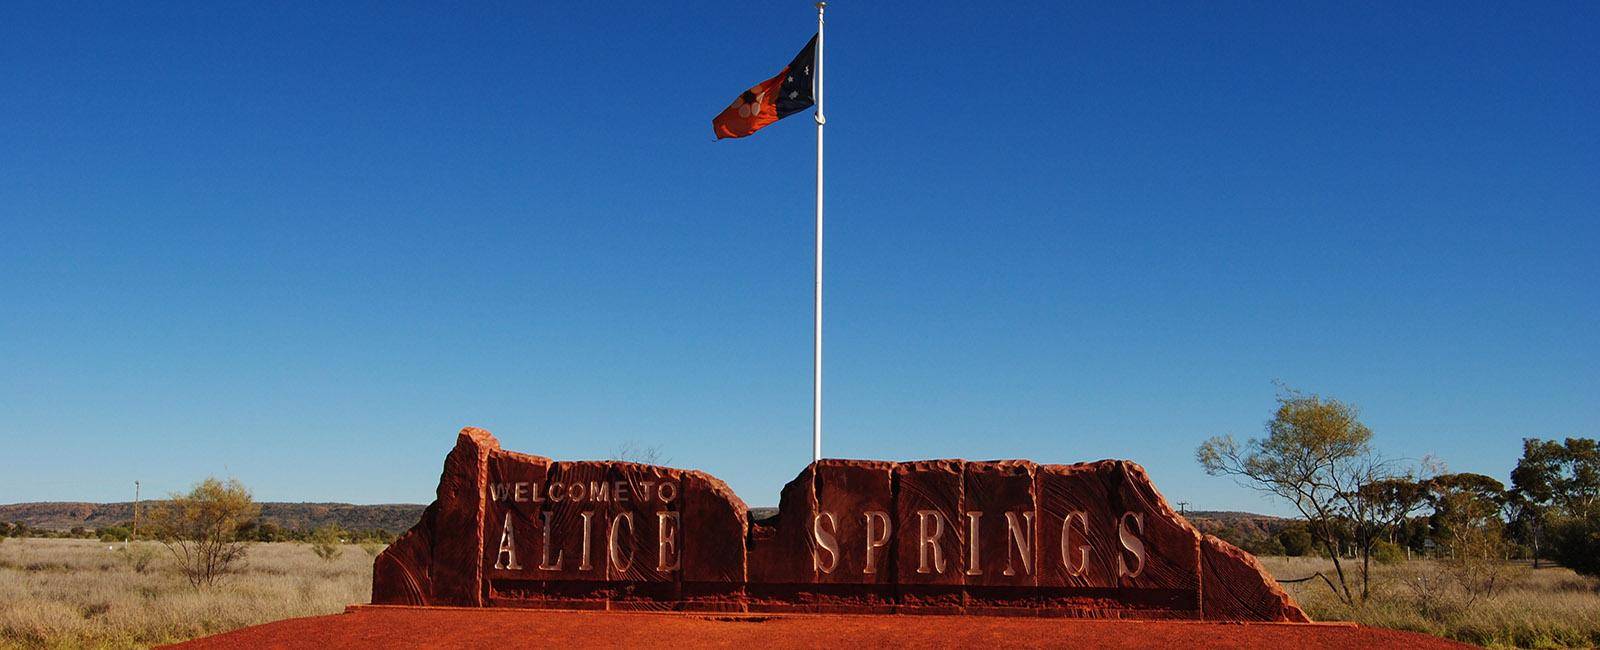 Welcome to Alice Springs sign | Welcome to Alice Springs